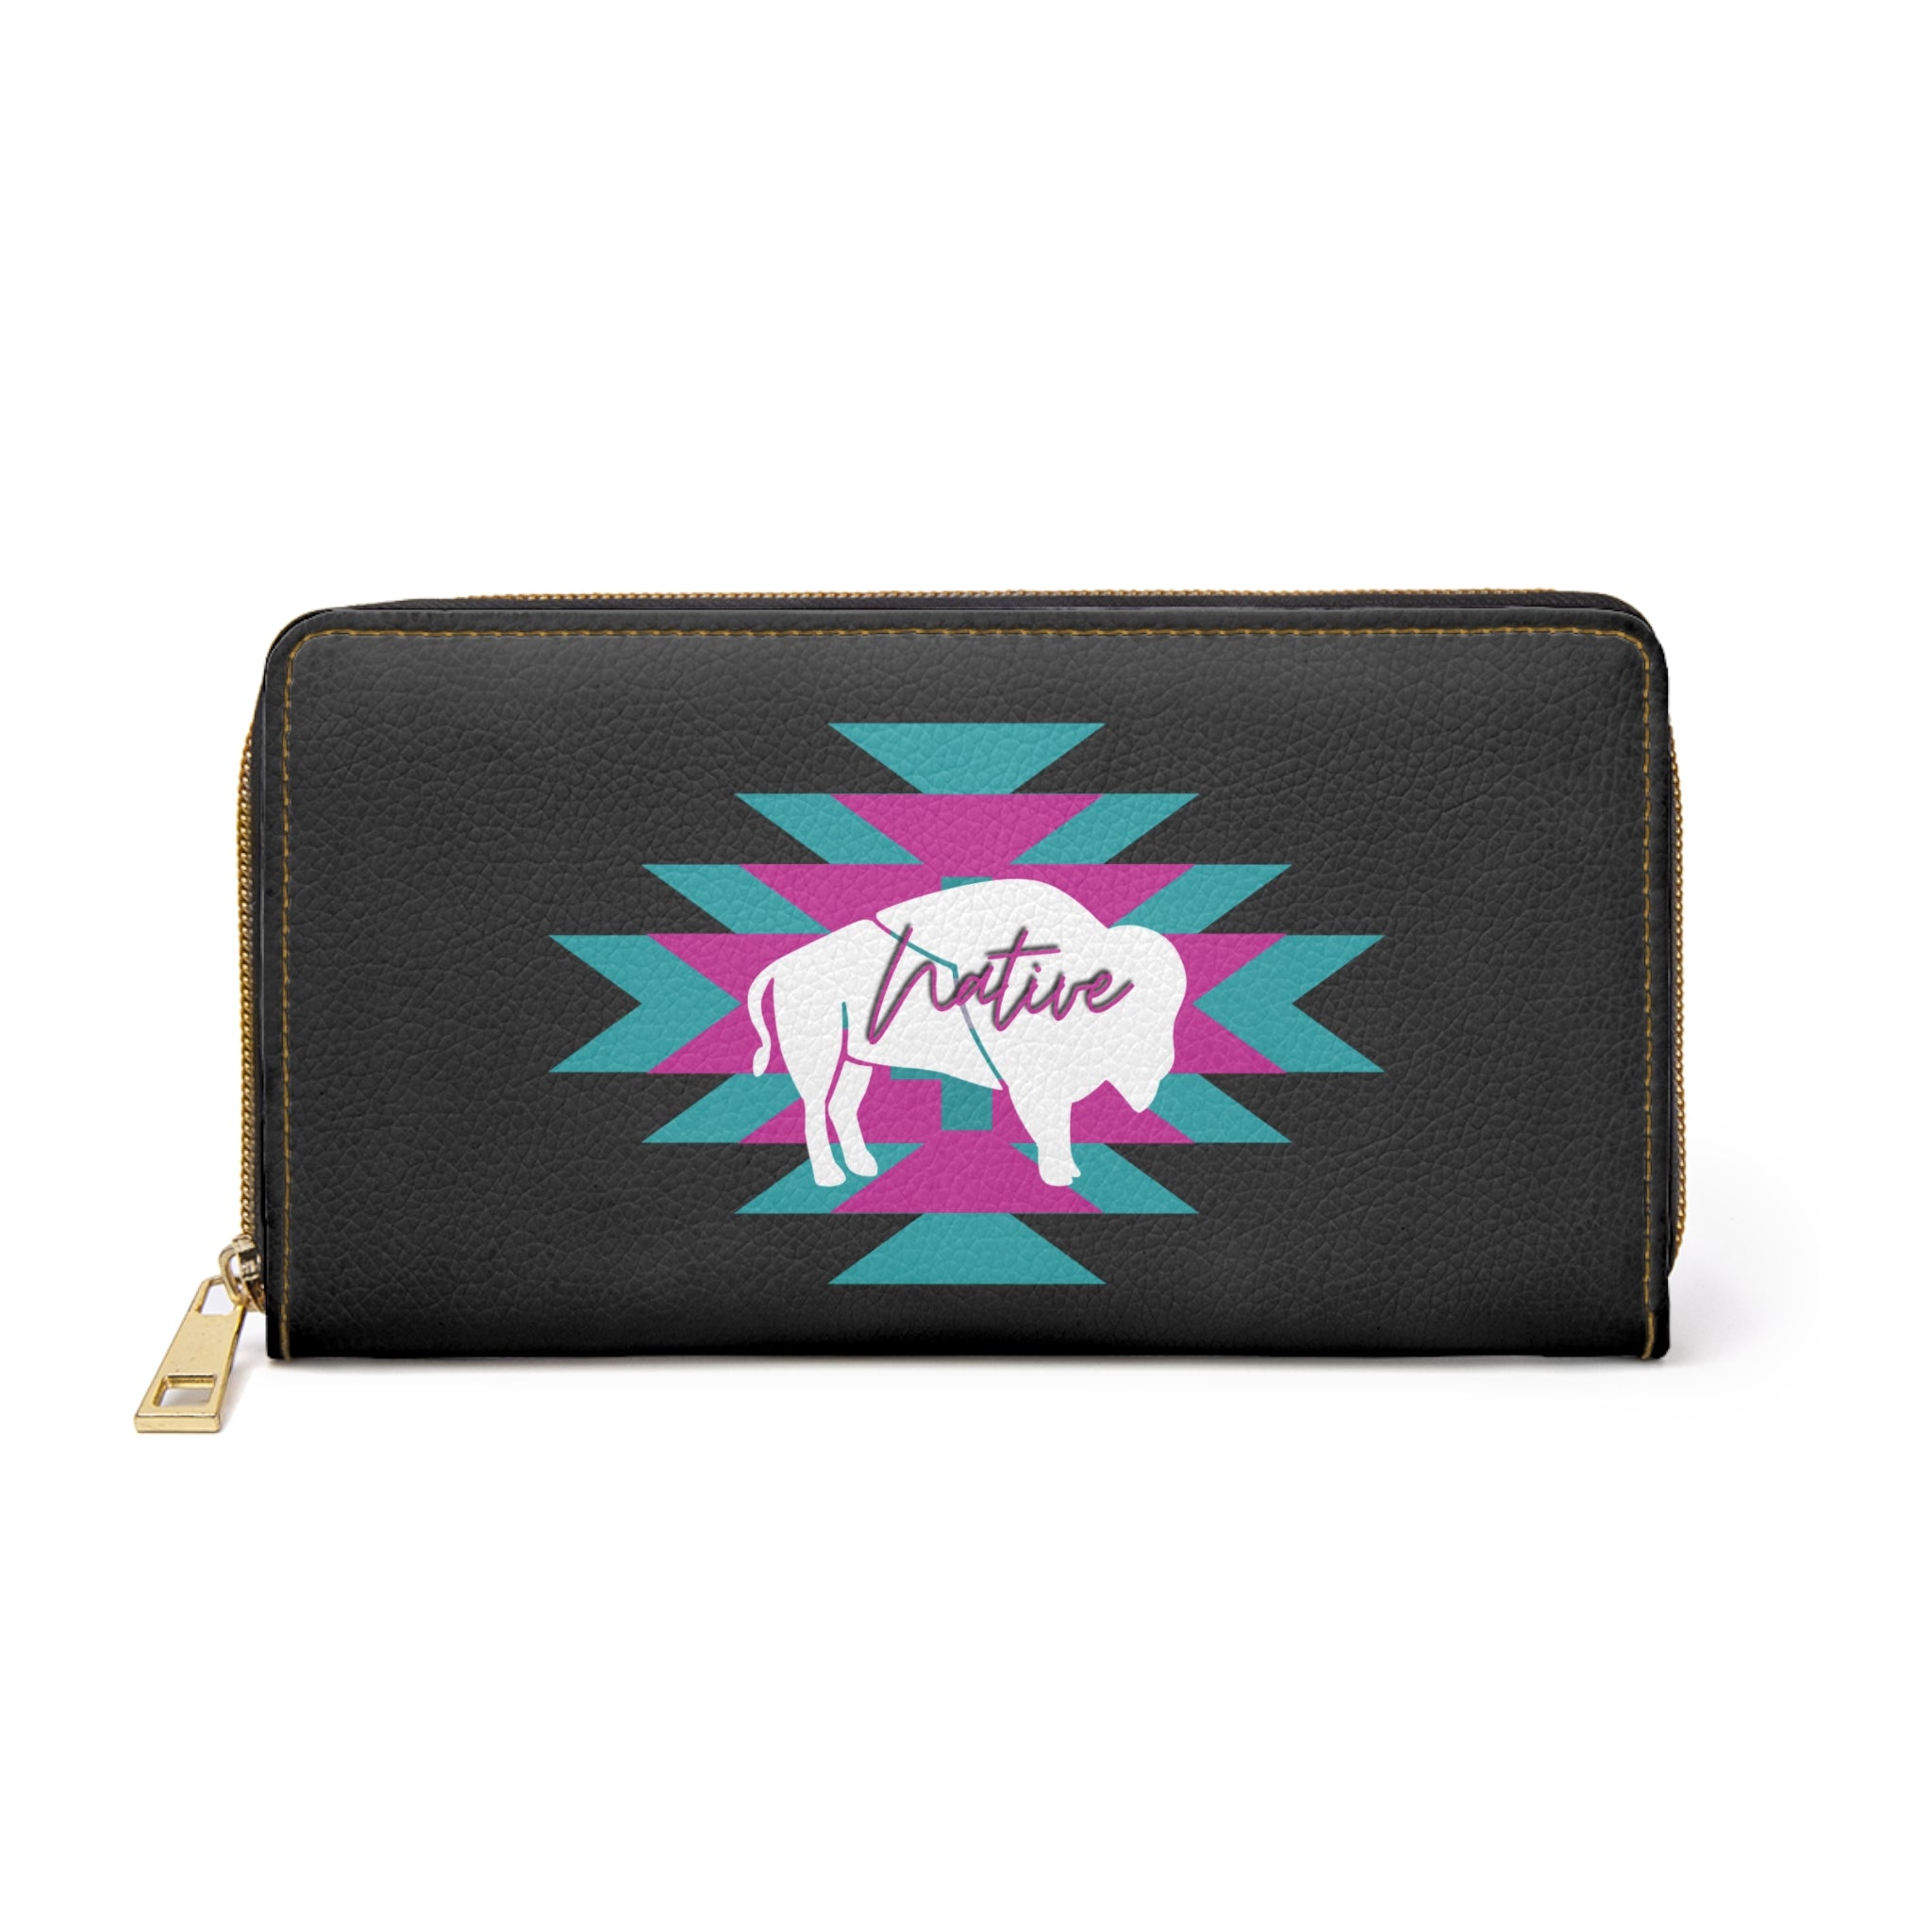 Native Bison with pink and teal pattern Zippered Wallet